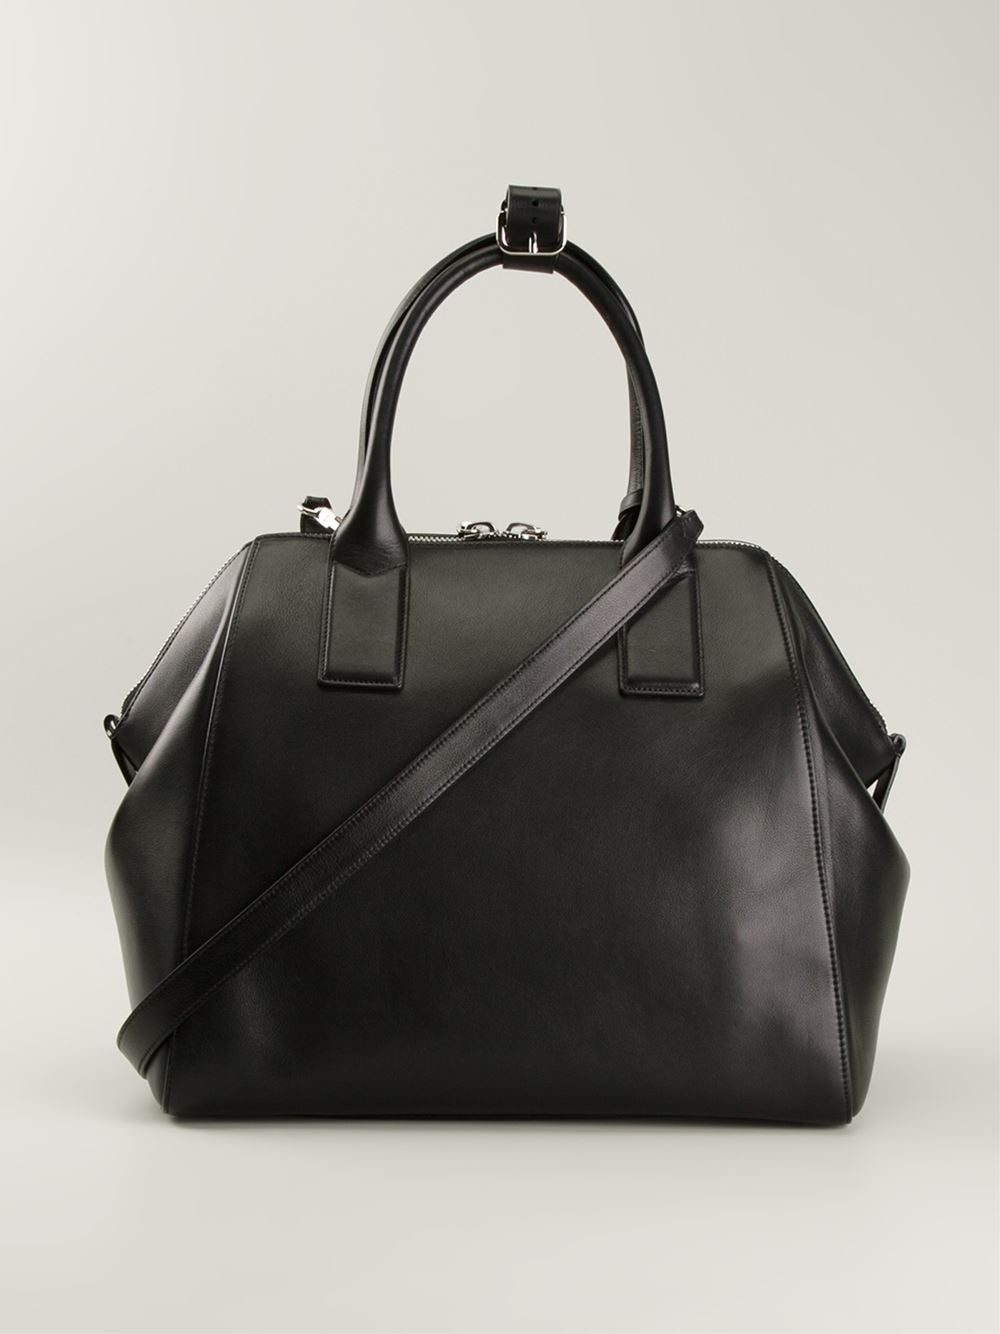 Marc jacobs Large 'Incognito' Tote Bag in Black | Lyst